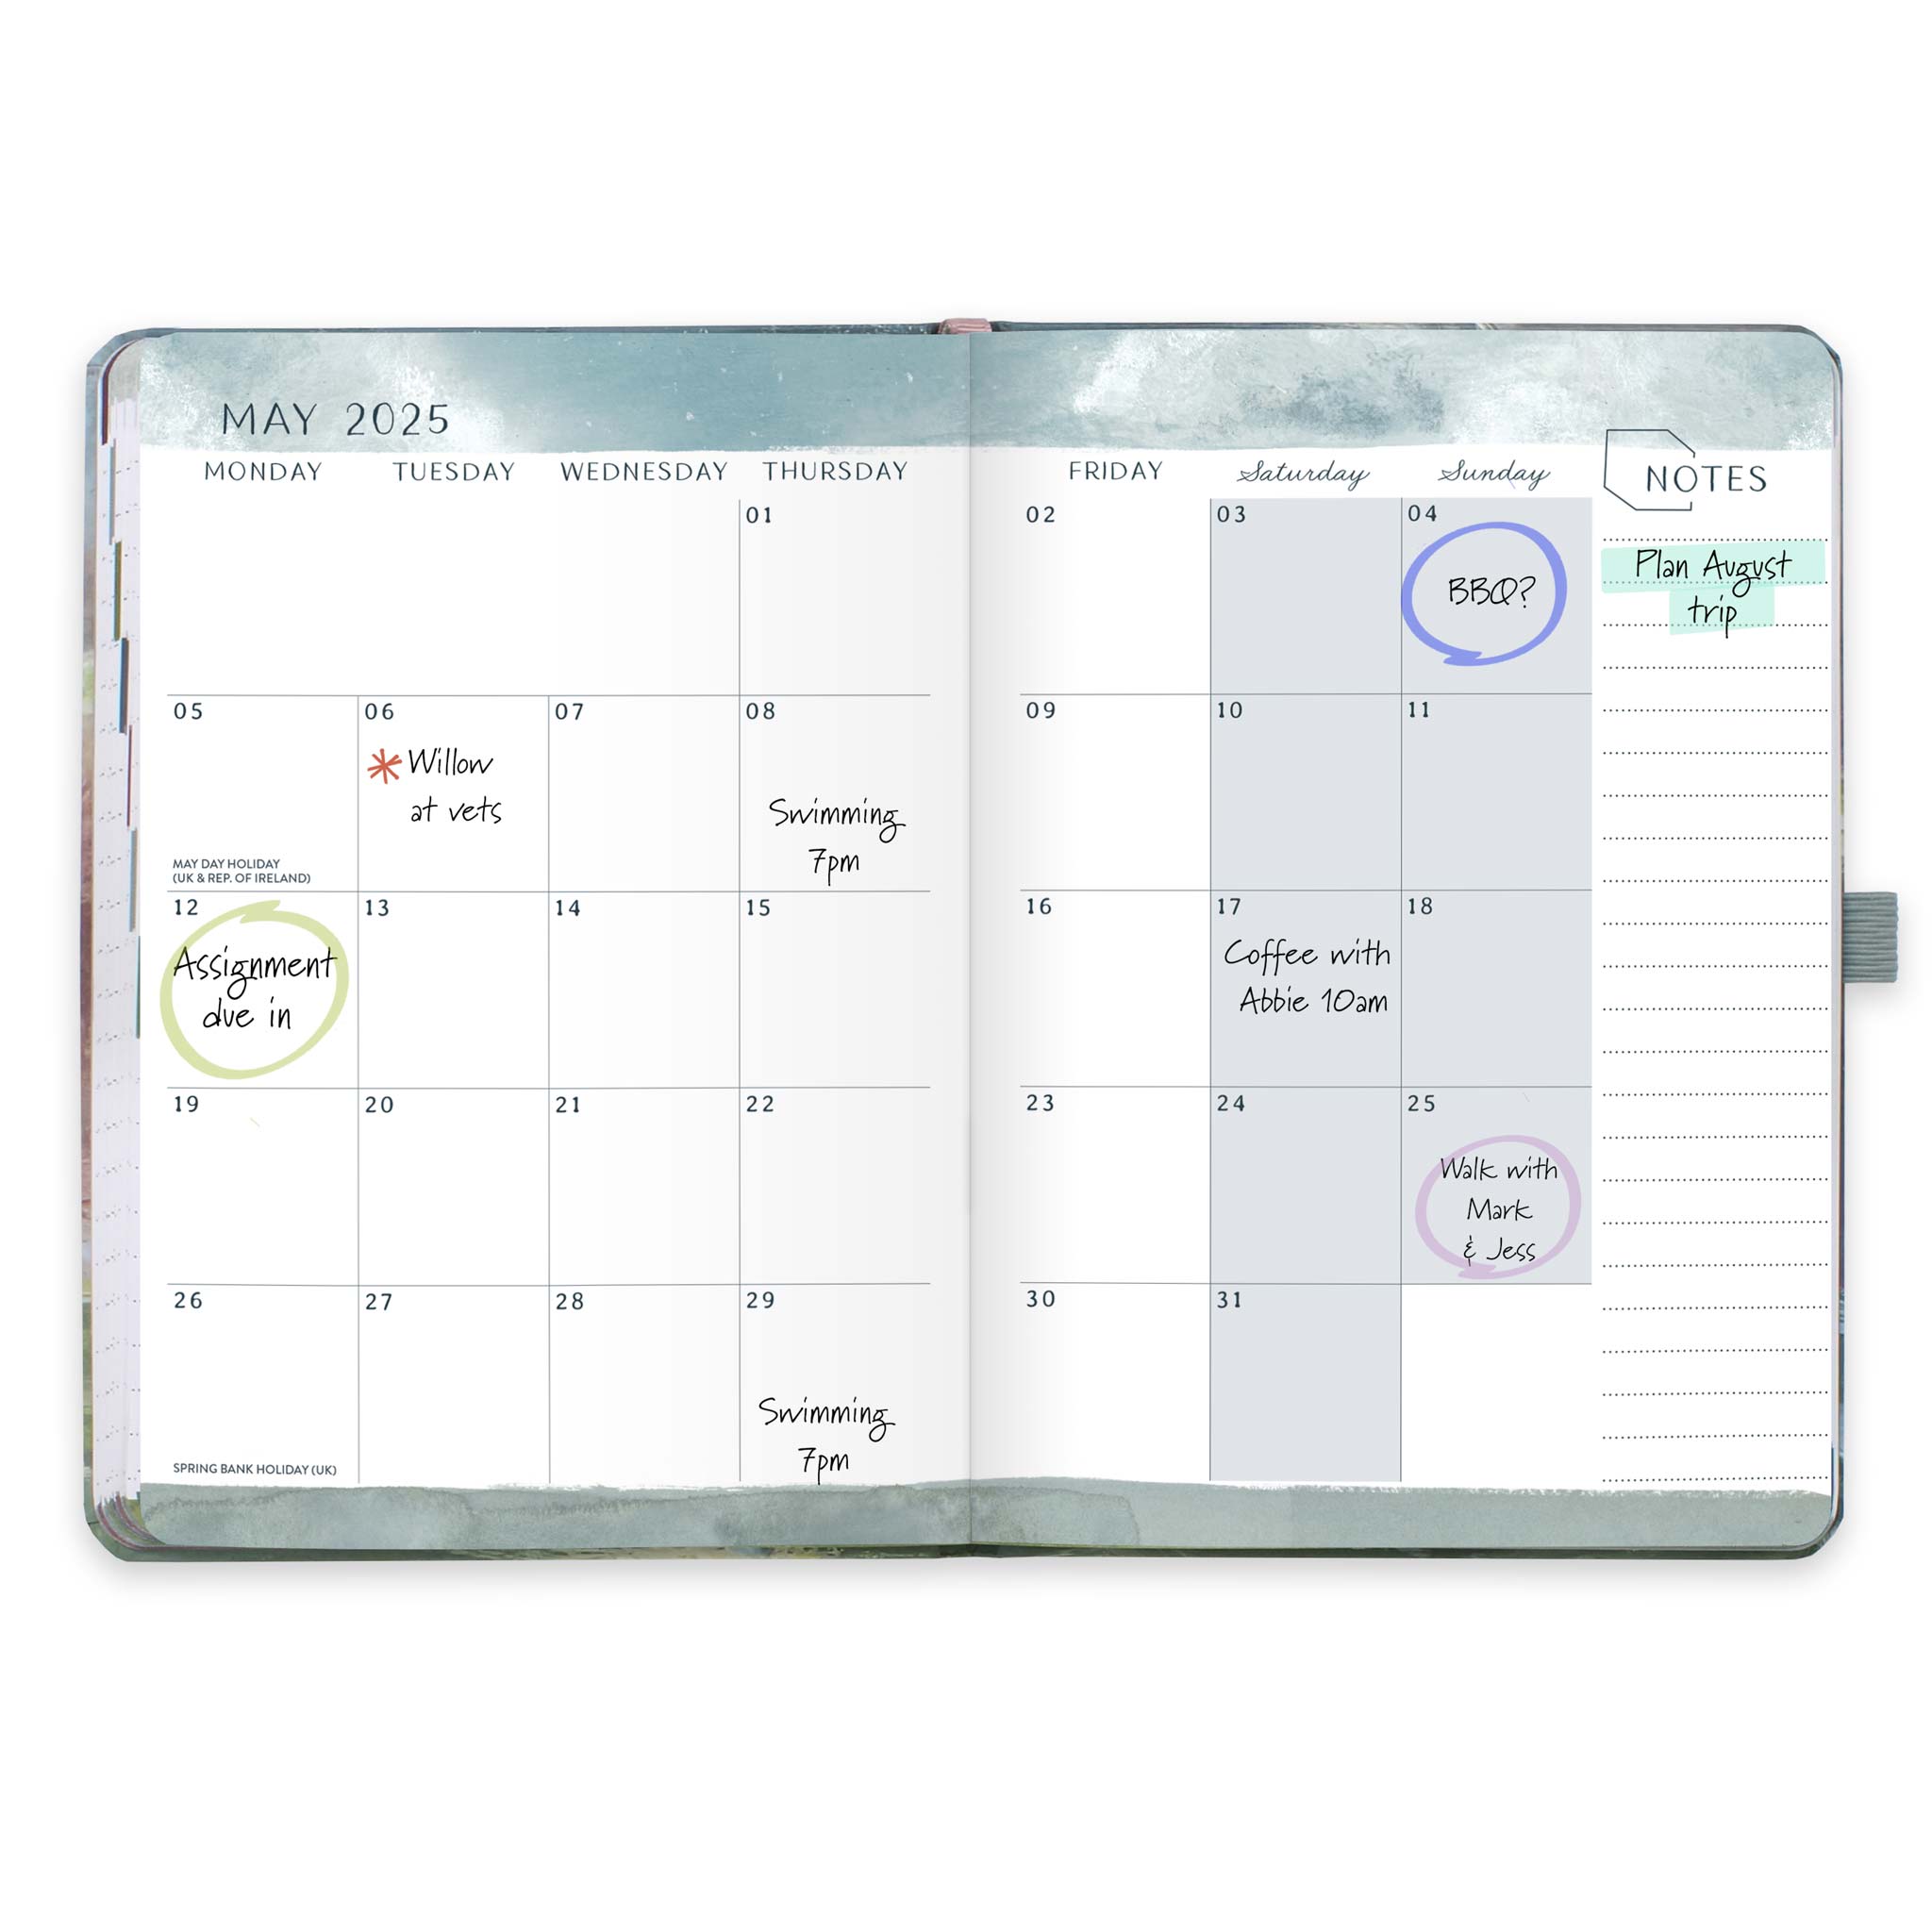 An open page diary spread with a month to view calendar with appointments